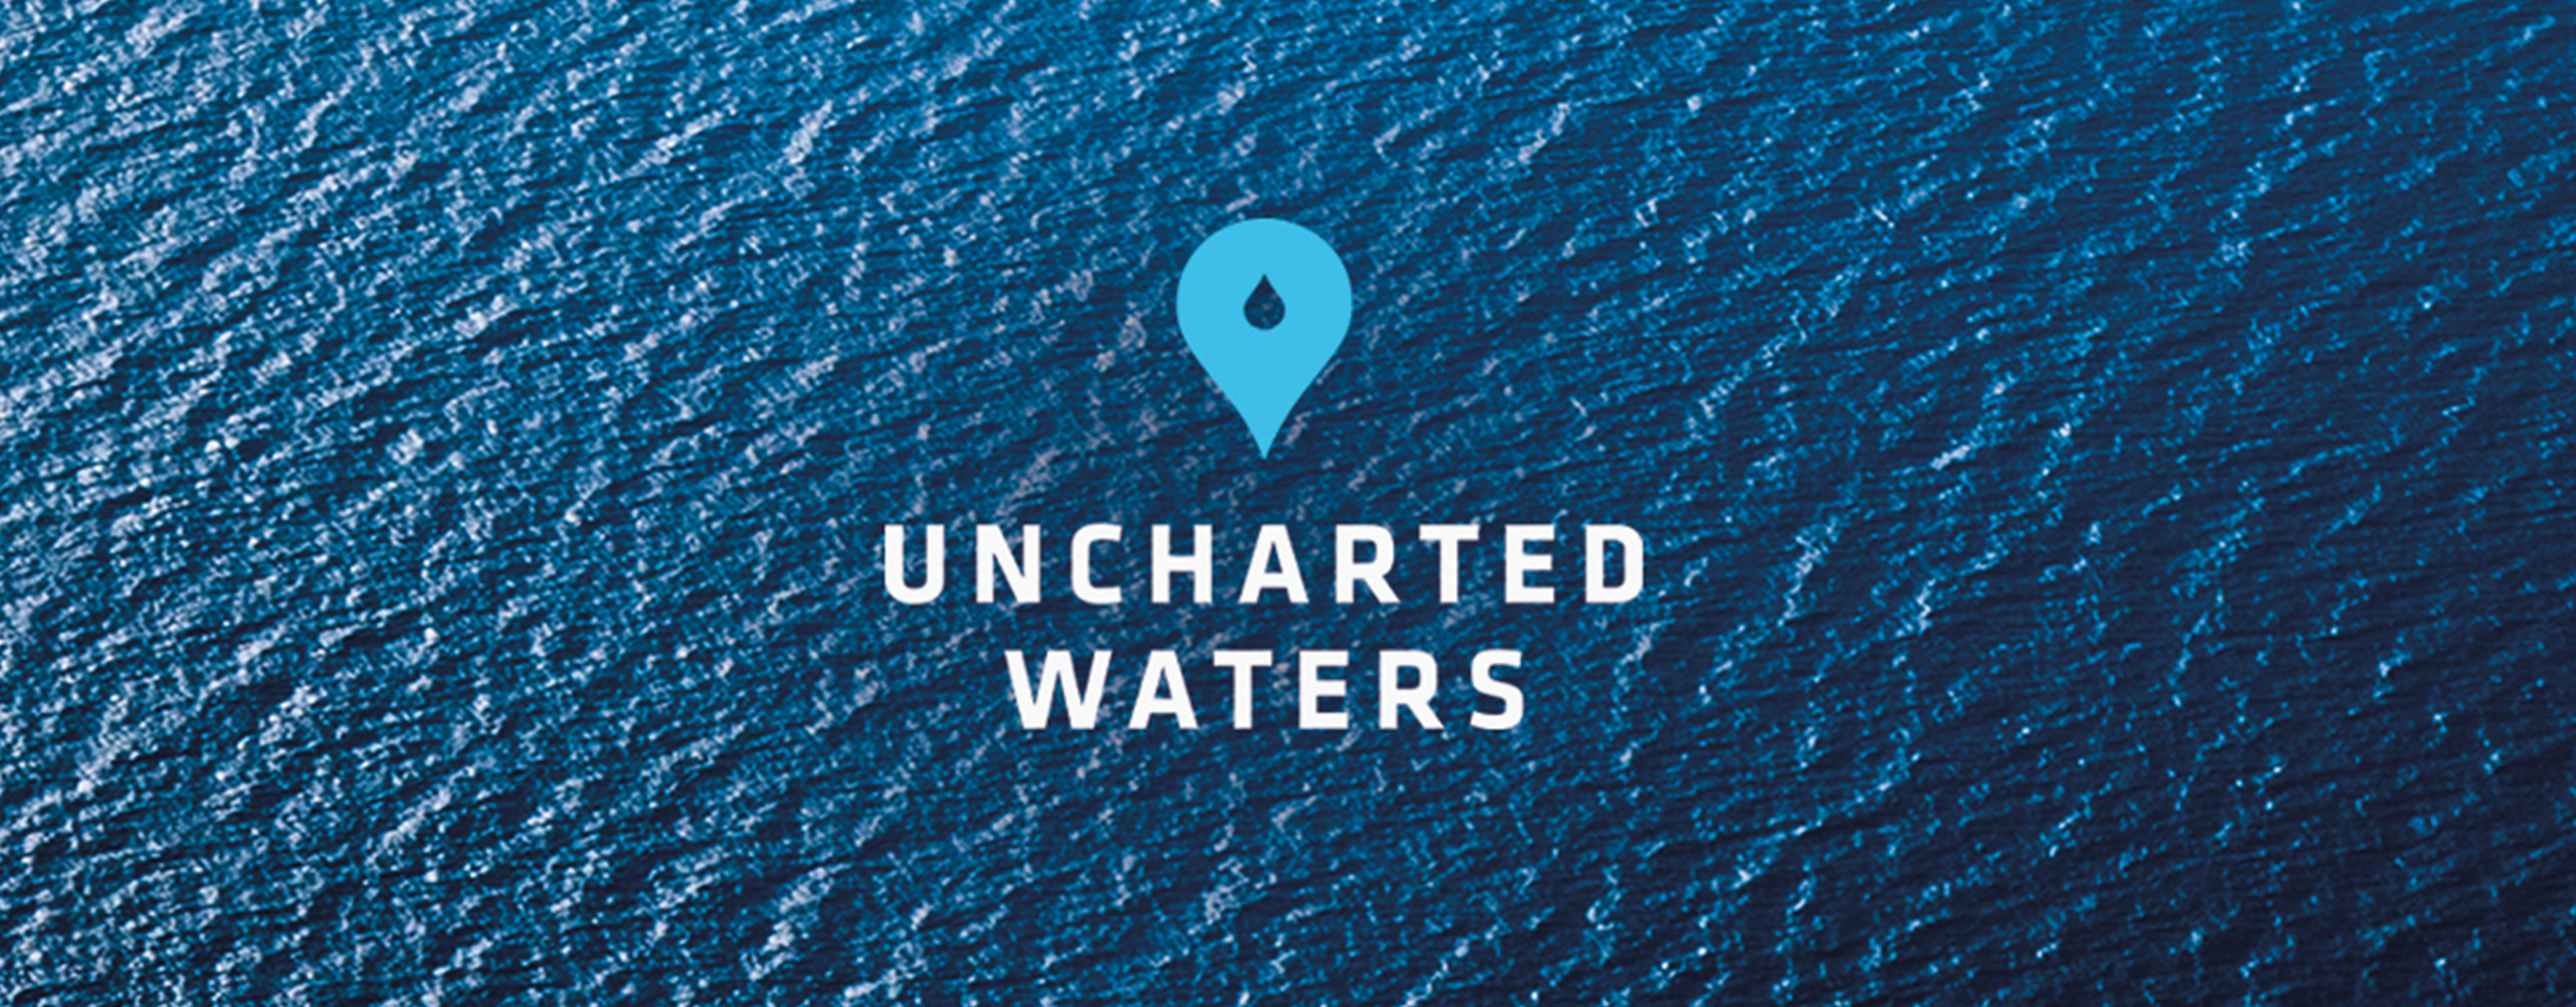 Uncharted Waters graphic